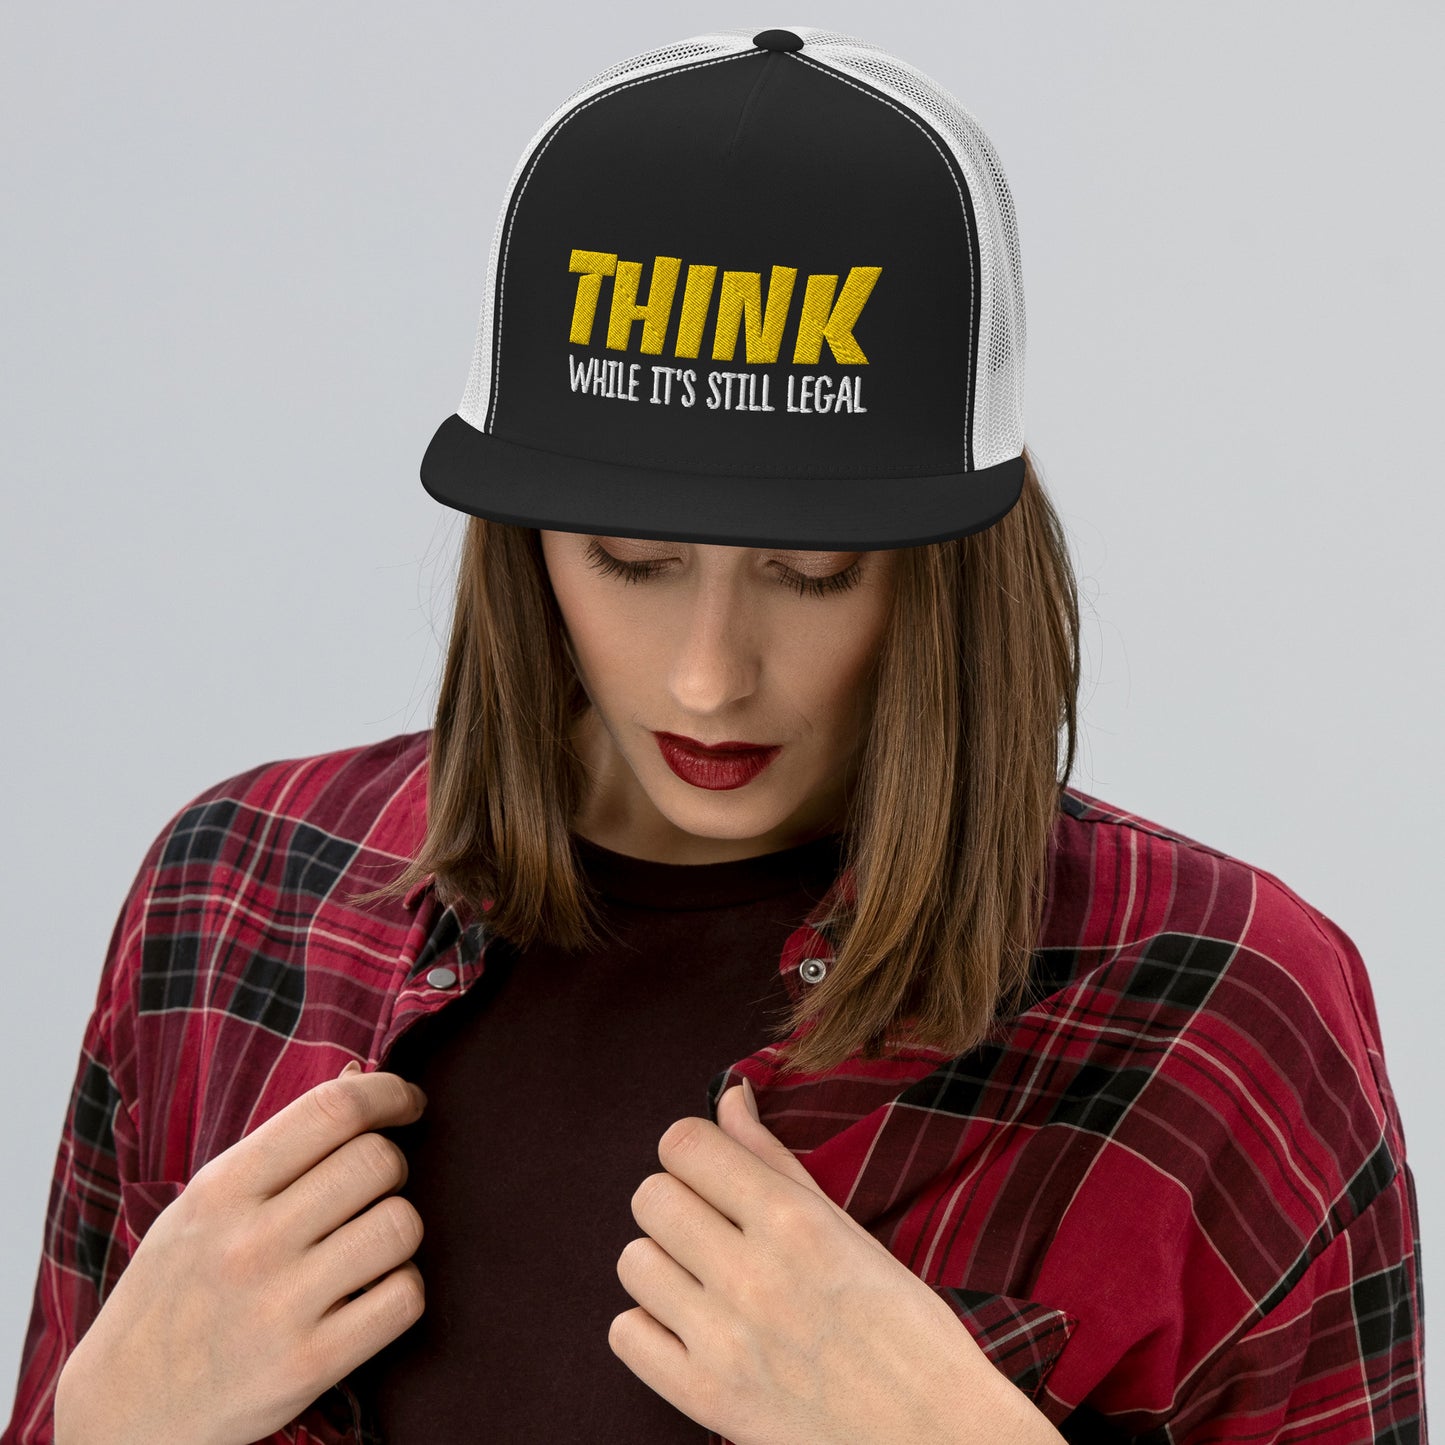 Think While It's Still Legal Trucker Cap - Defend Free Thought and Expression